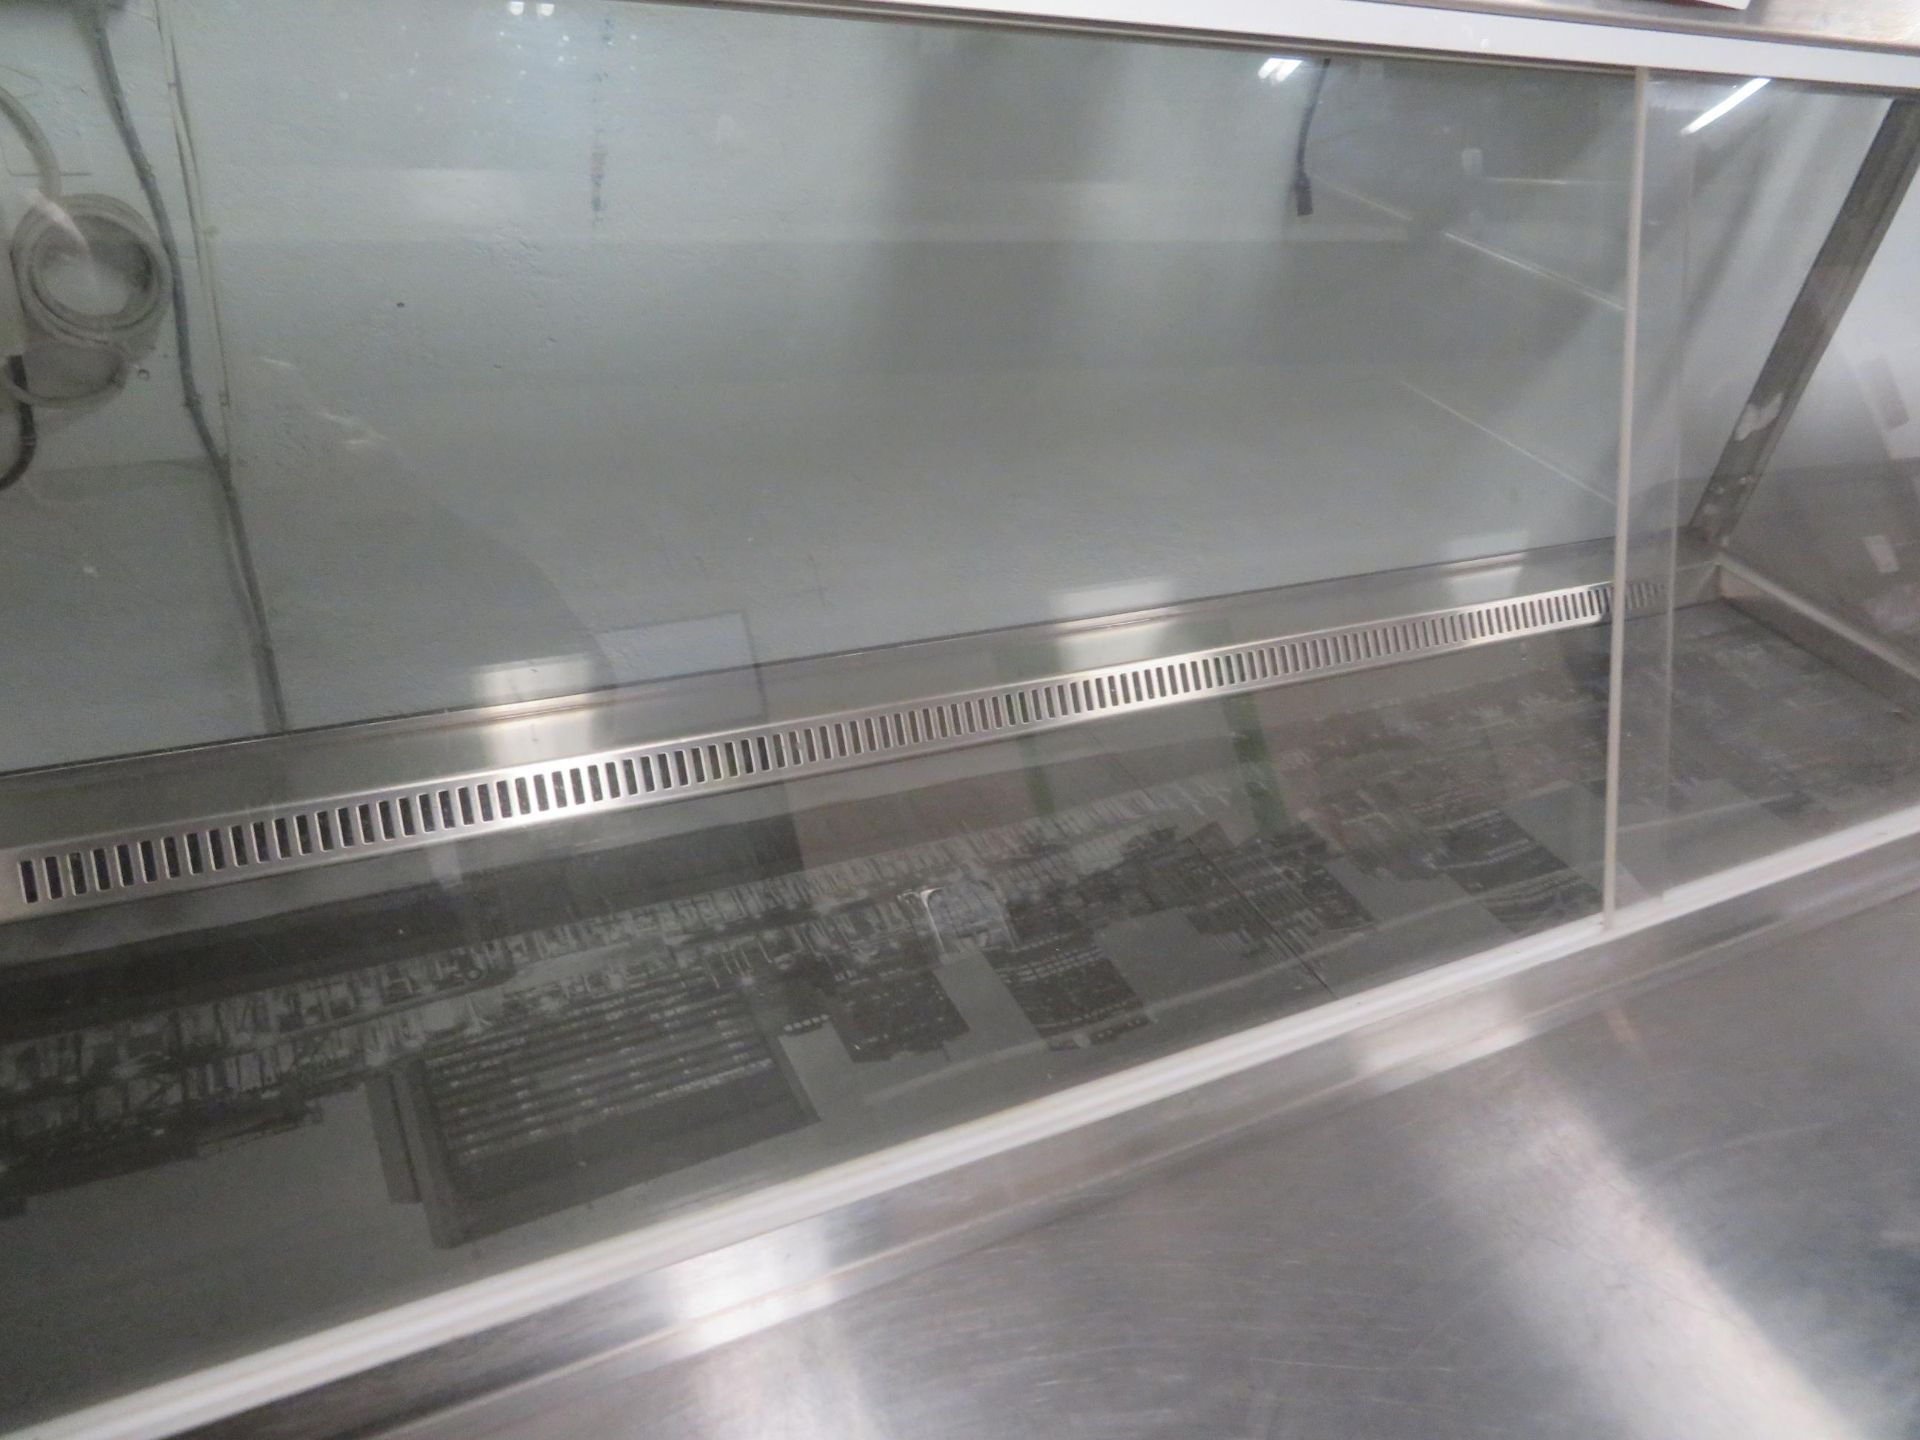 Stainless steel refrigerated display counter on wheels approx. 72"w x 35"d x 54"h - Image 3 of 4